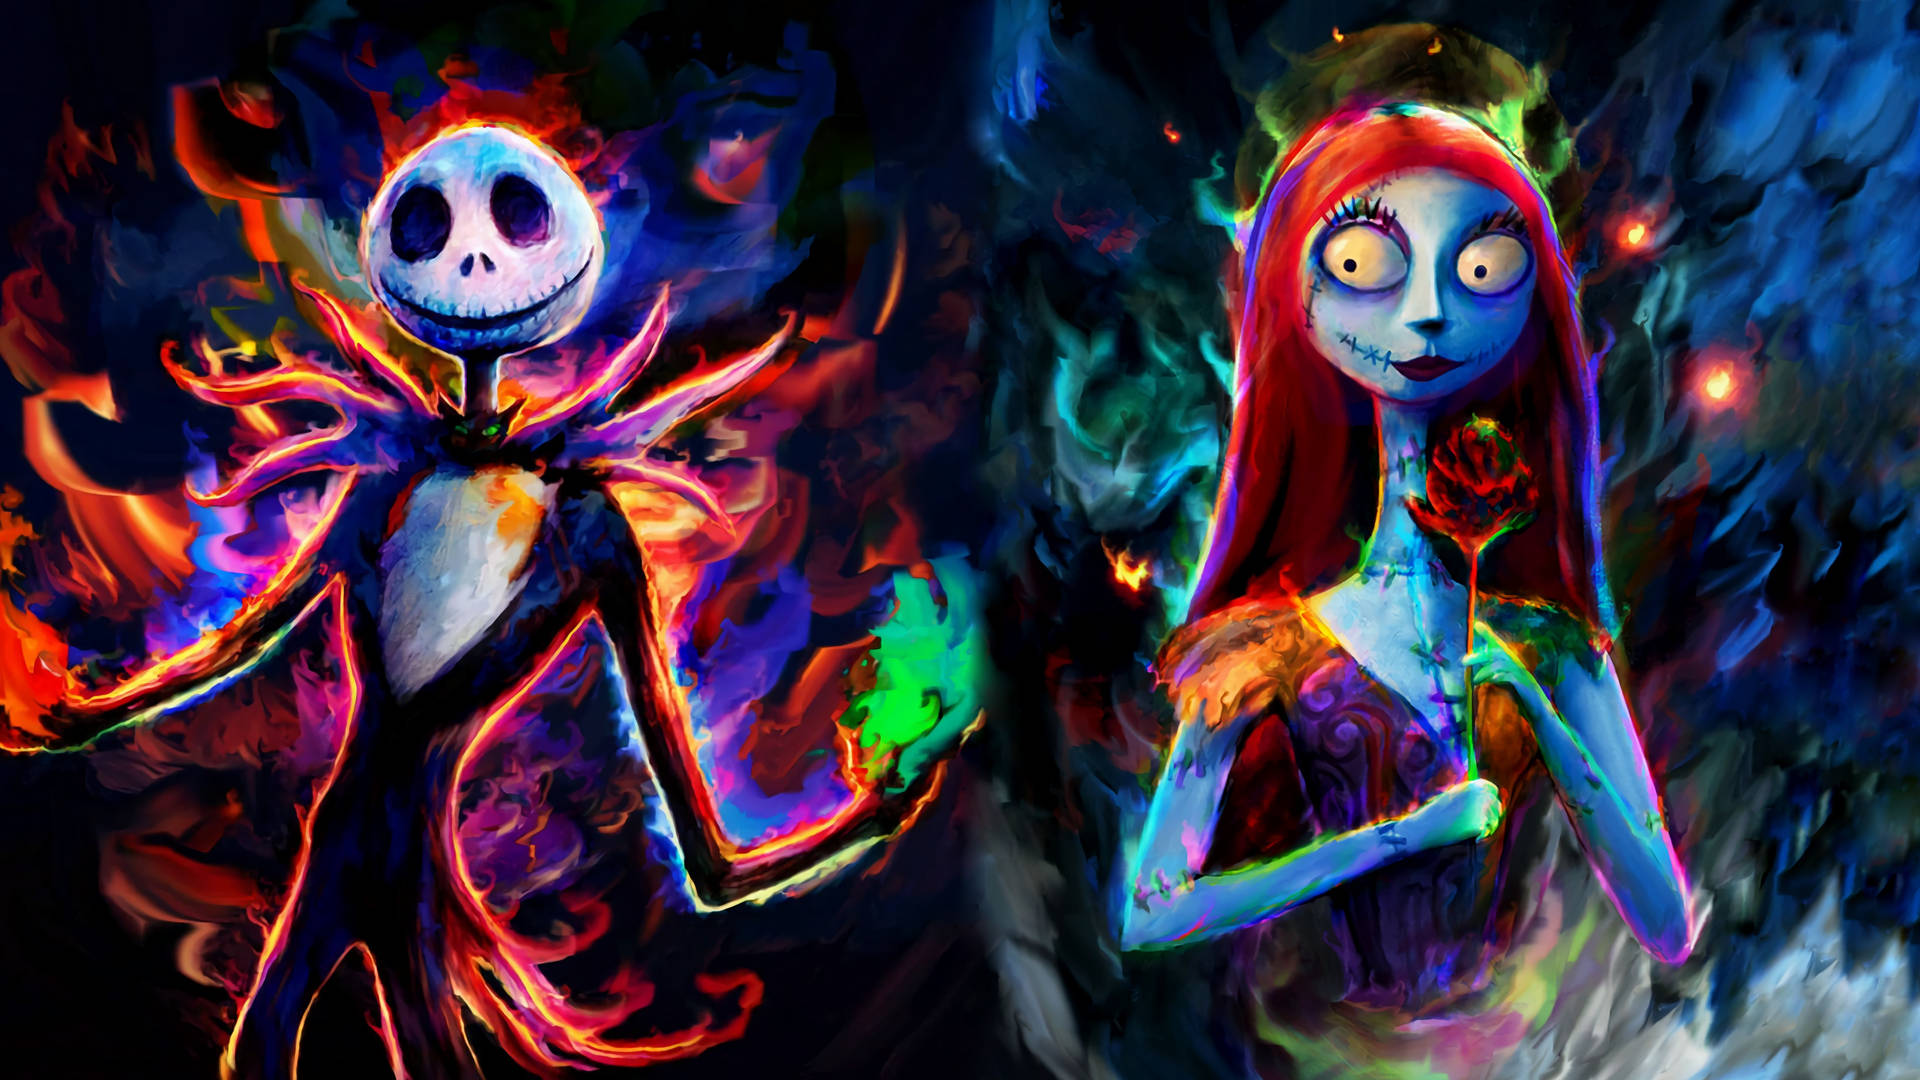 Beautiful Fan Art The Nightmare Before Christmas. Background